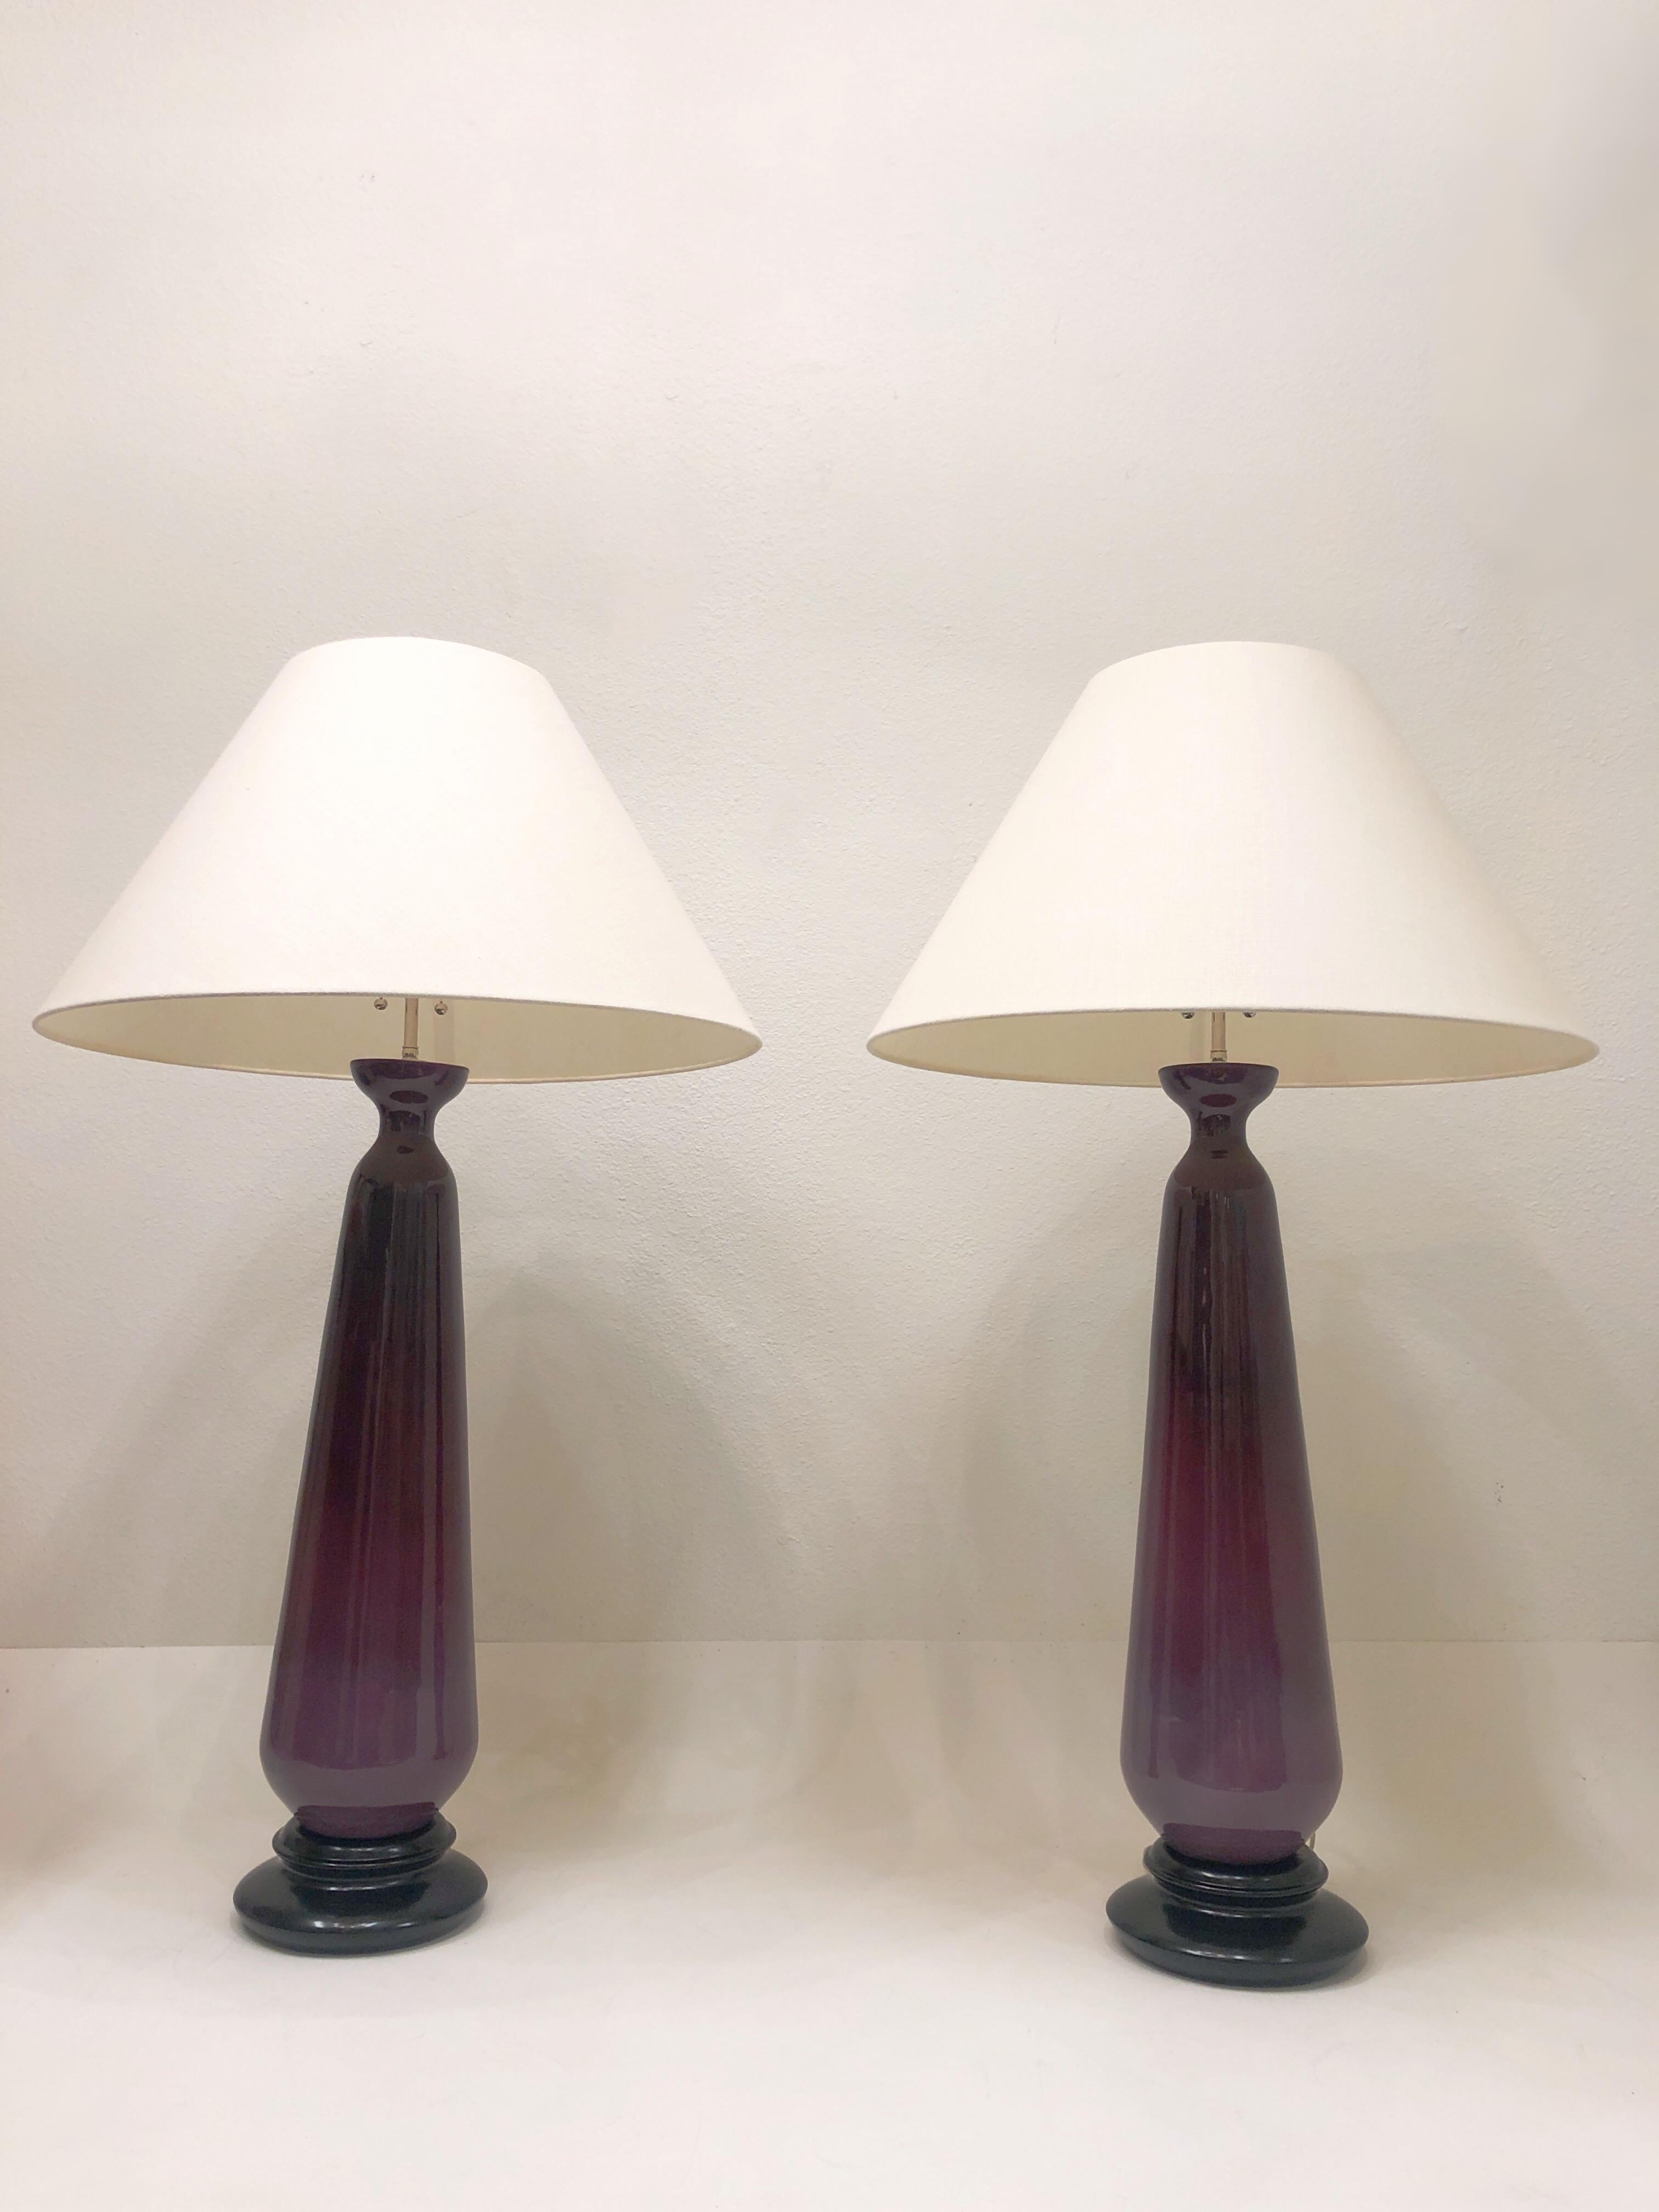 1970’s Pair of large purple glazed ceramic on black lacquered wood base with new polish nickel hardware and vanilla linen shades table lamps. 

Measurements: 45.75” High, 26” Diameter. 
Base: 9” Diameter.